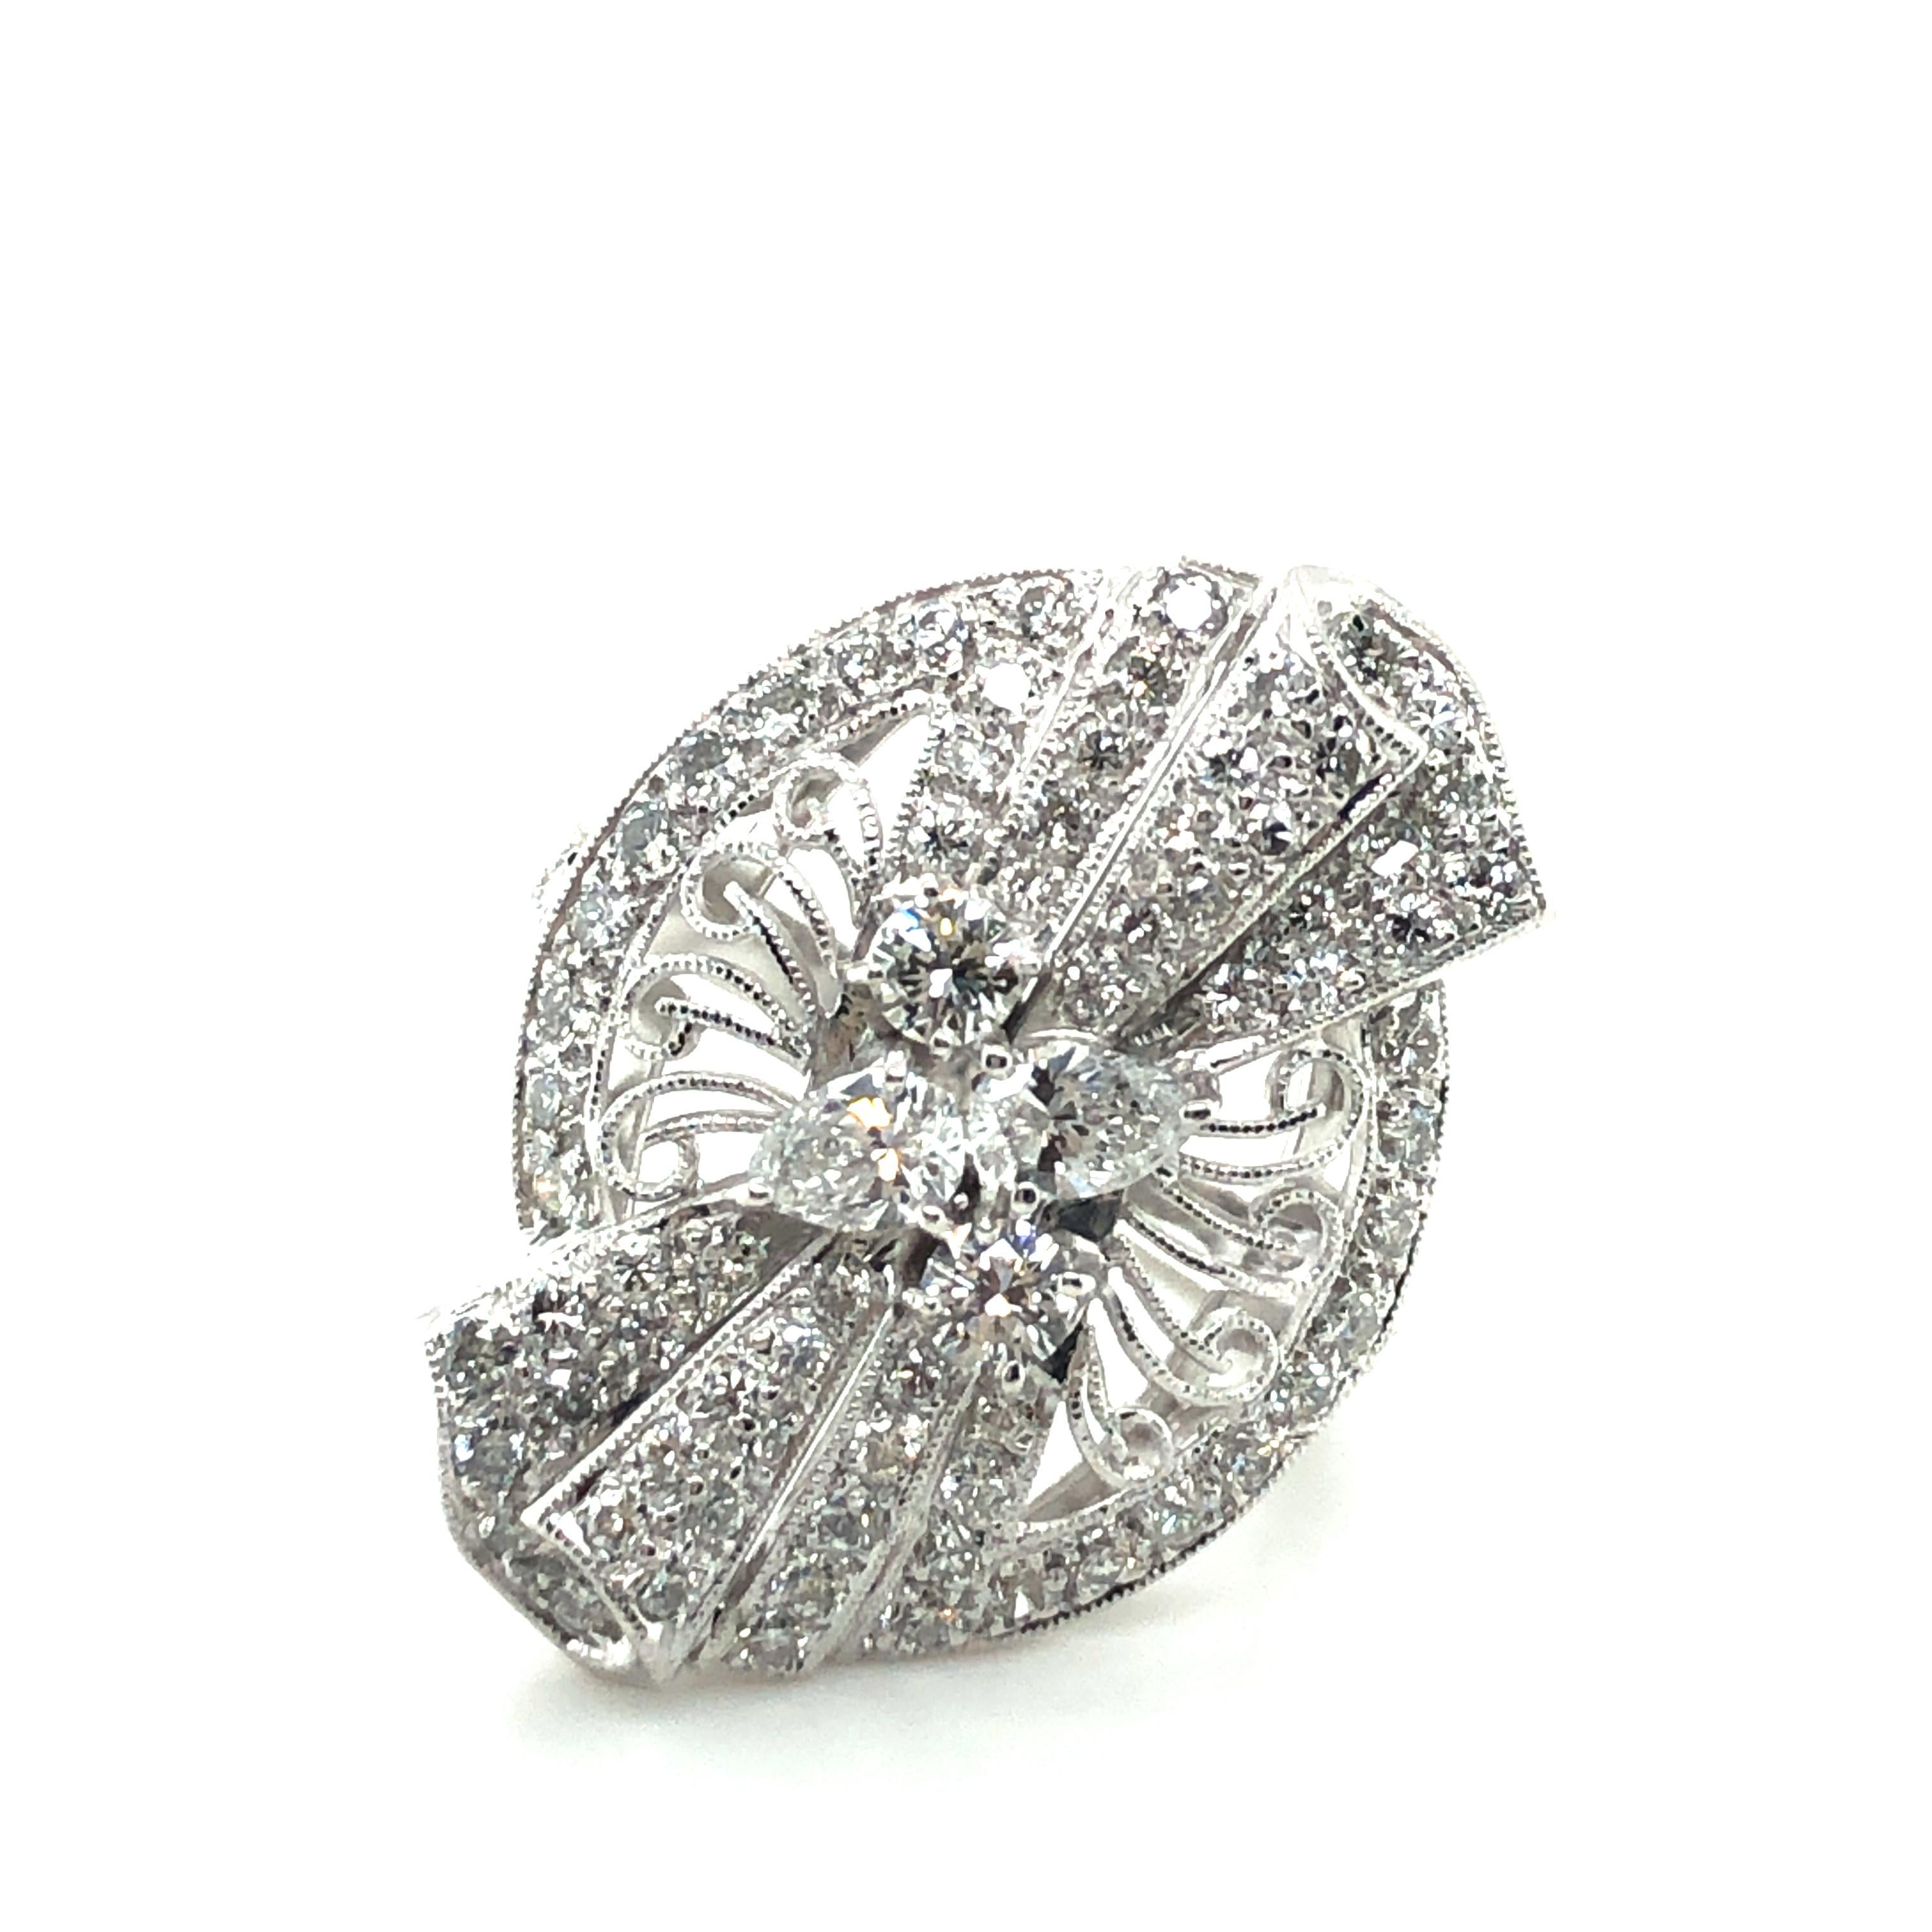 This playful and sparkling garland-style ring in 18 karat white gold is set in the centre with 2 pear-shaped diamonds of F/G colour and vs clarity, total weight approximately 0.20 carats.
In addition the bow motiv and entourage are set with 78